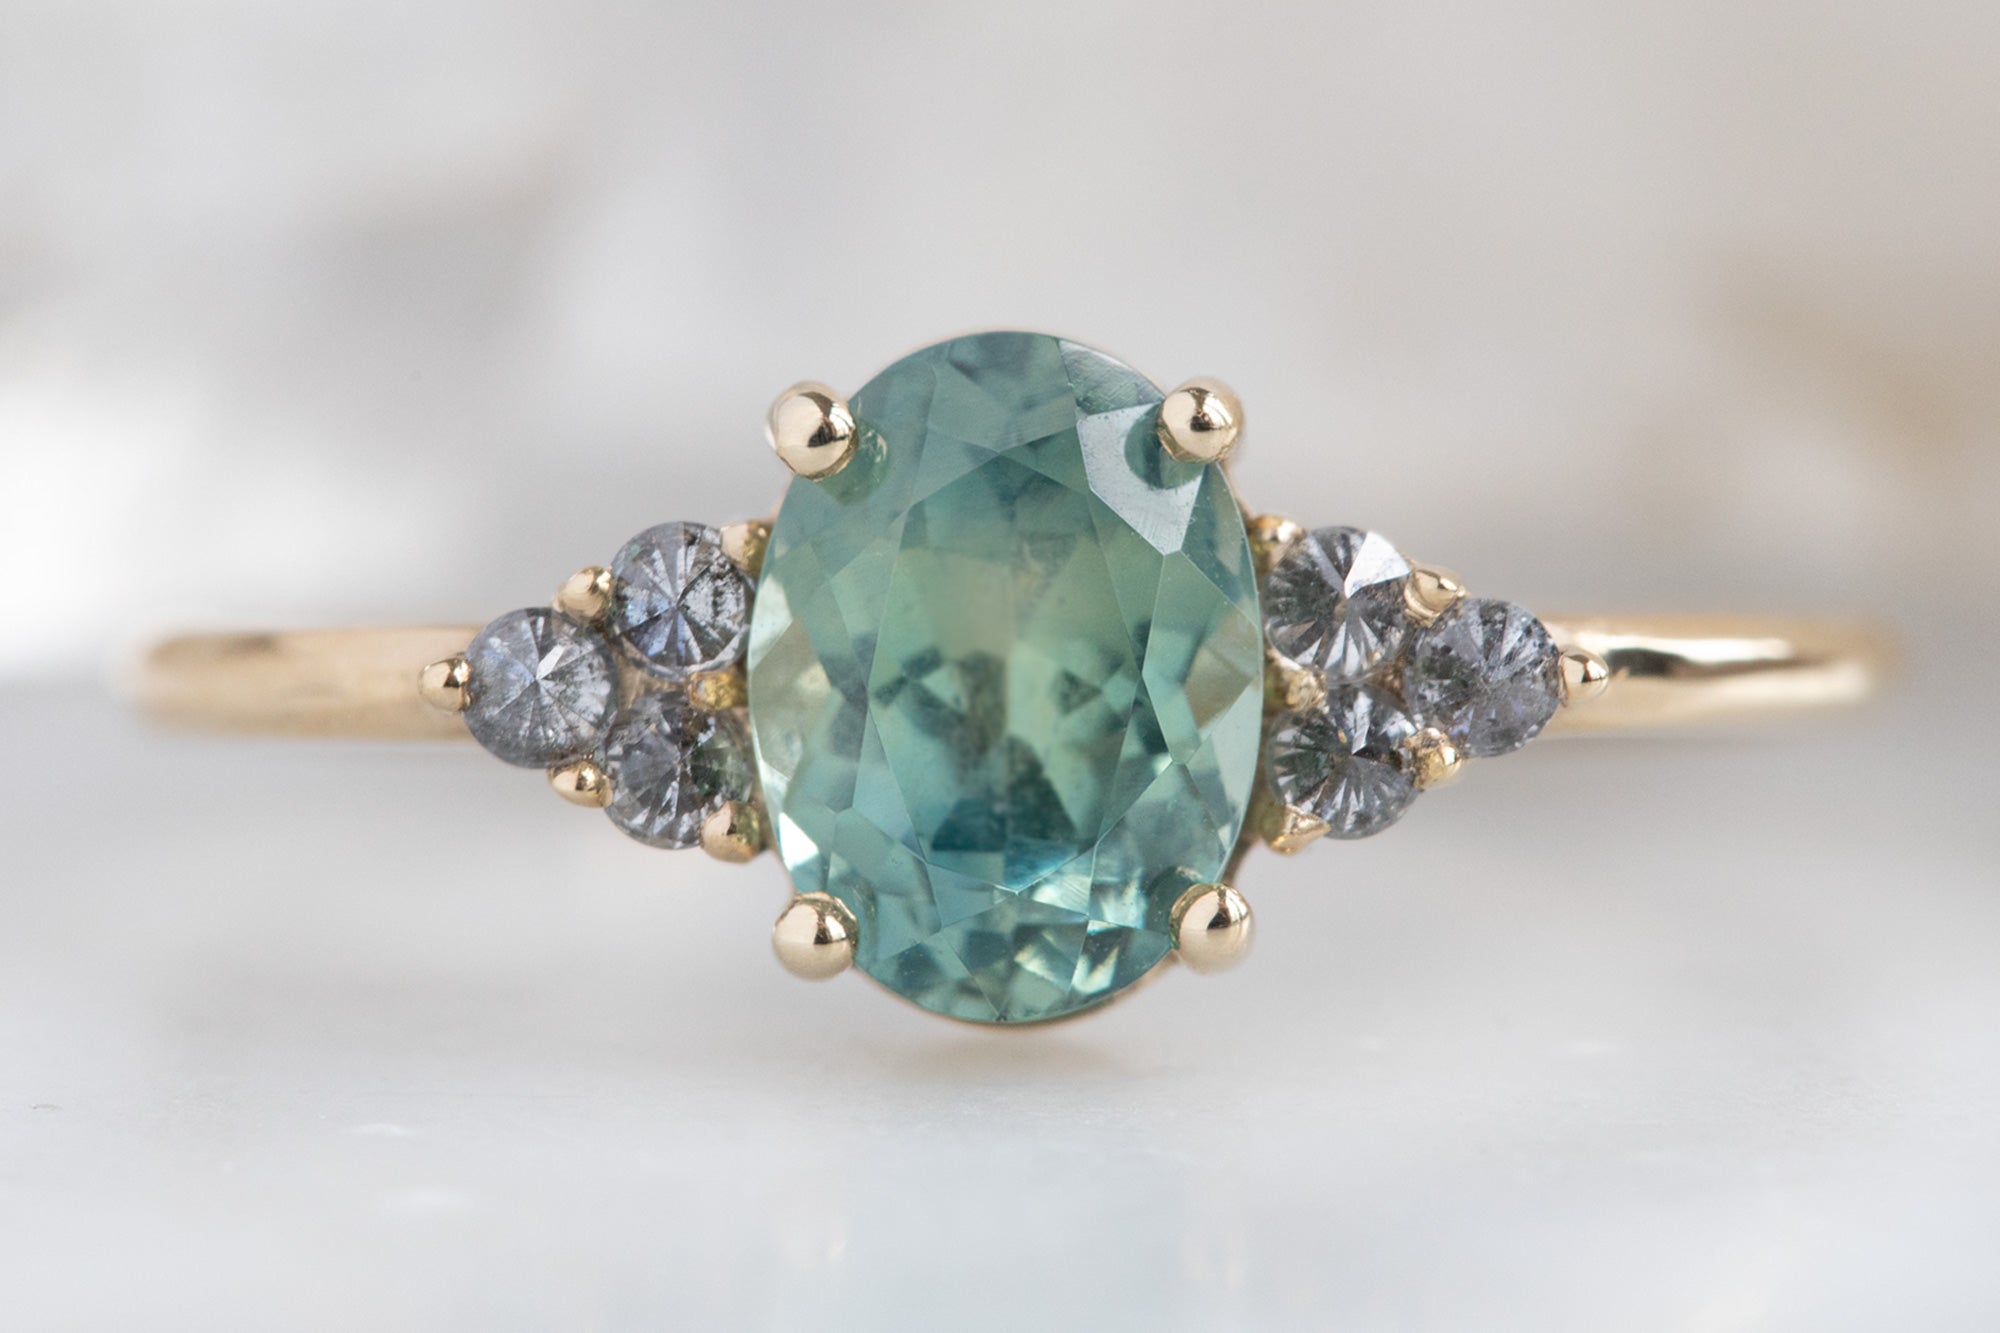 The Ivy Ring with an Oval-Cut Montana Sapphire